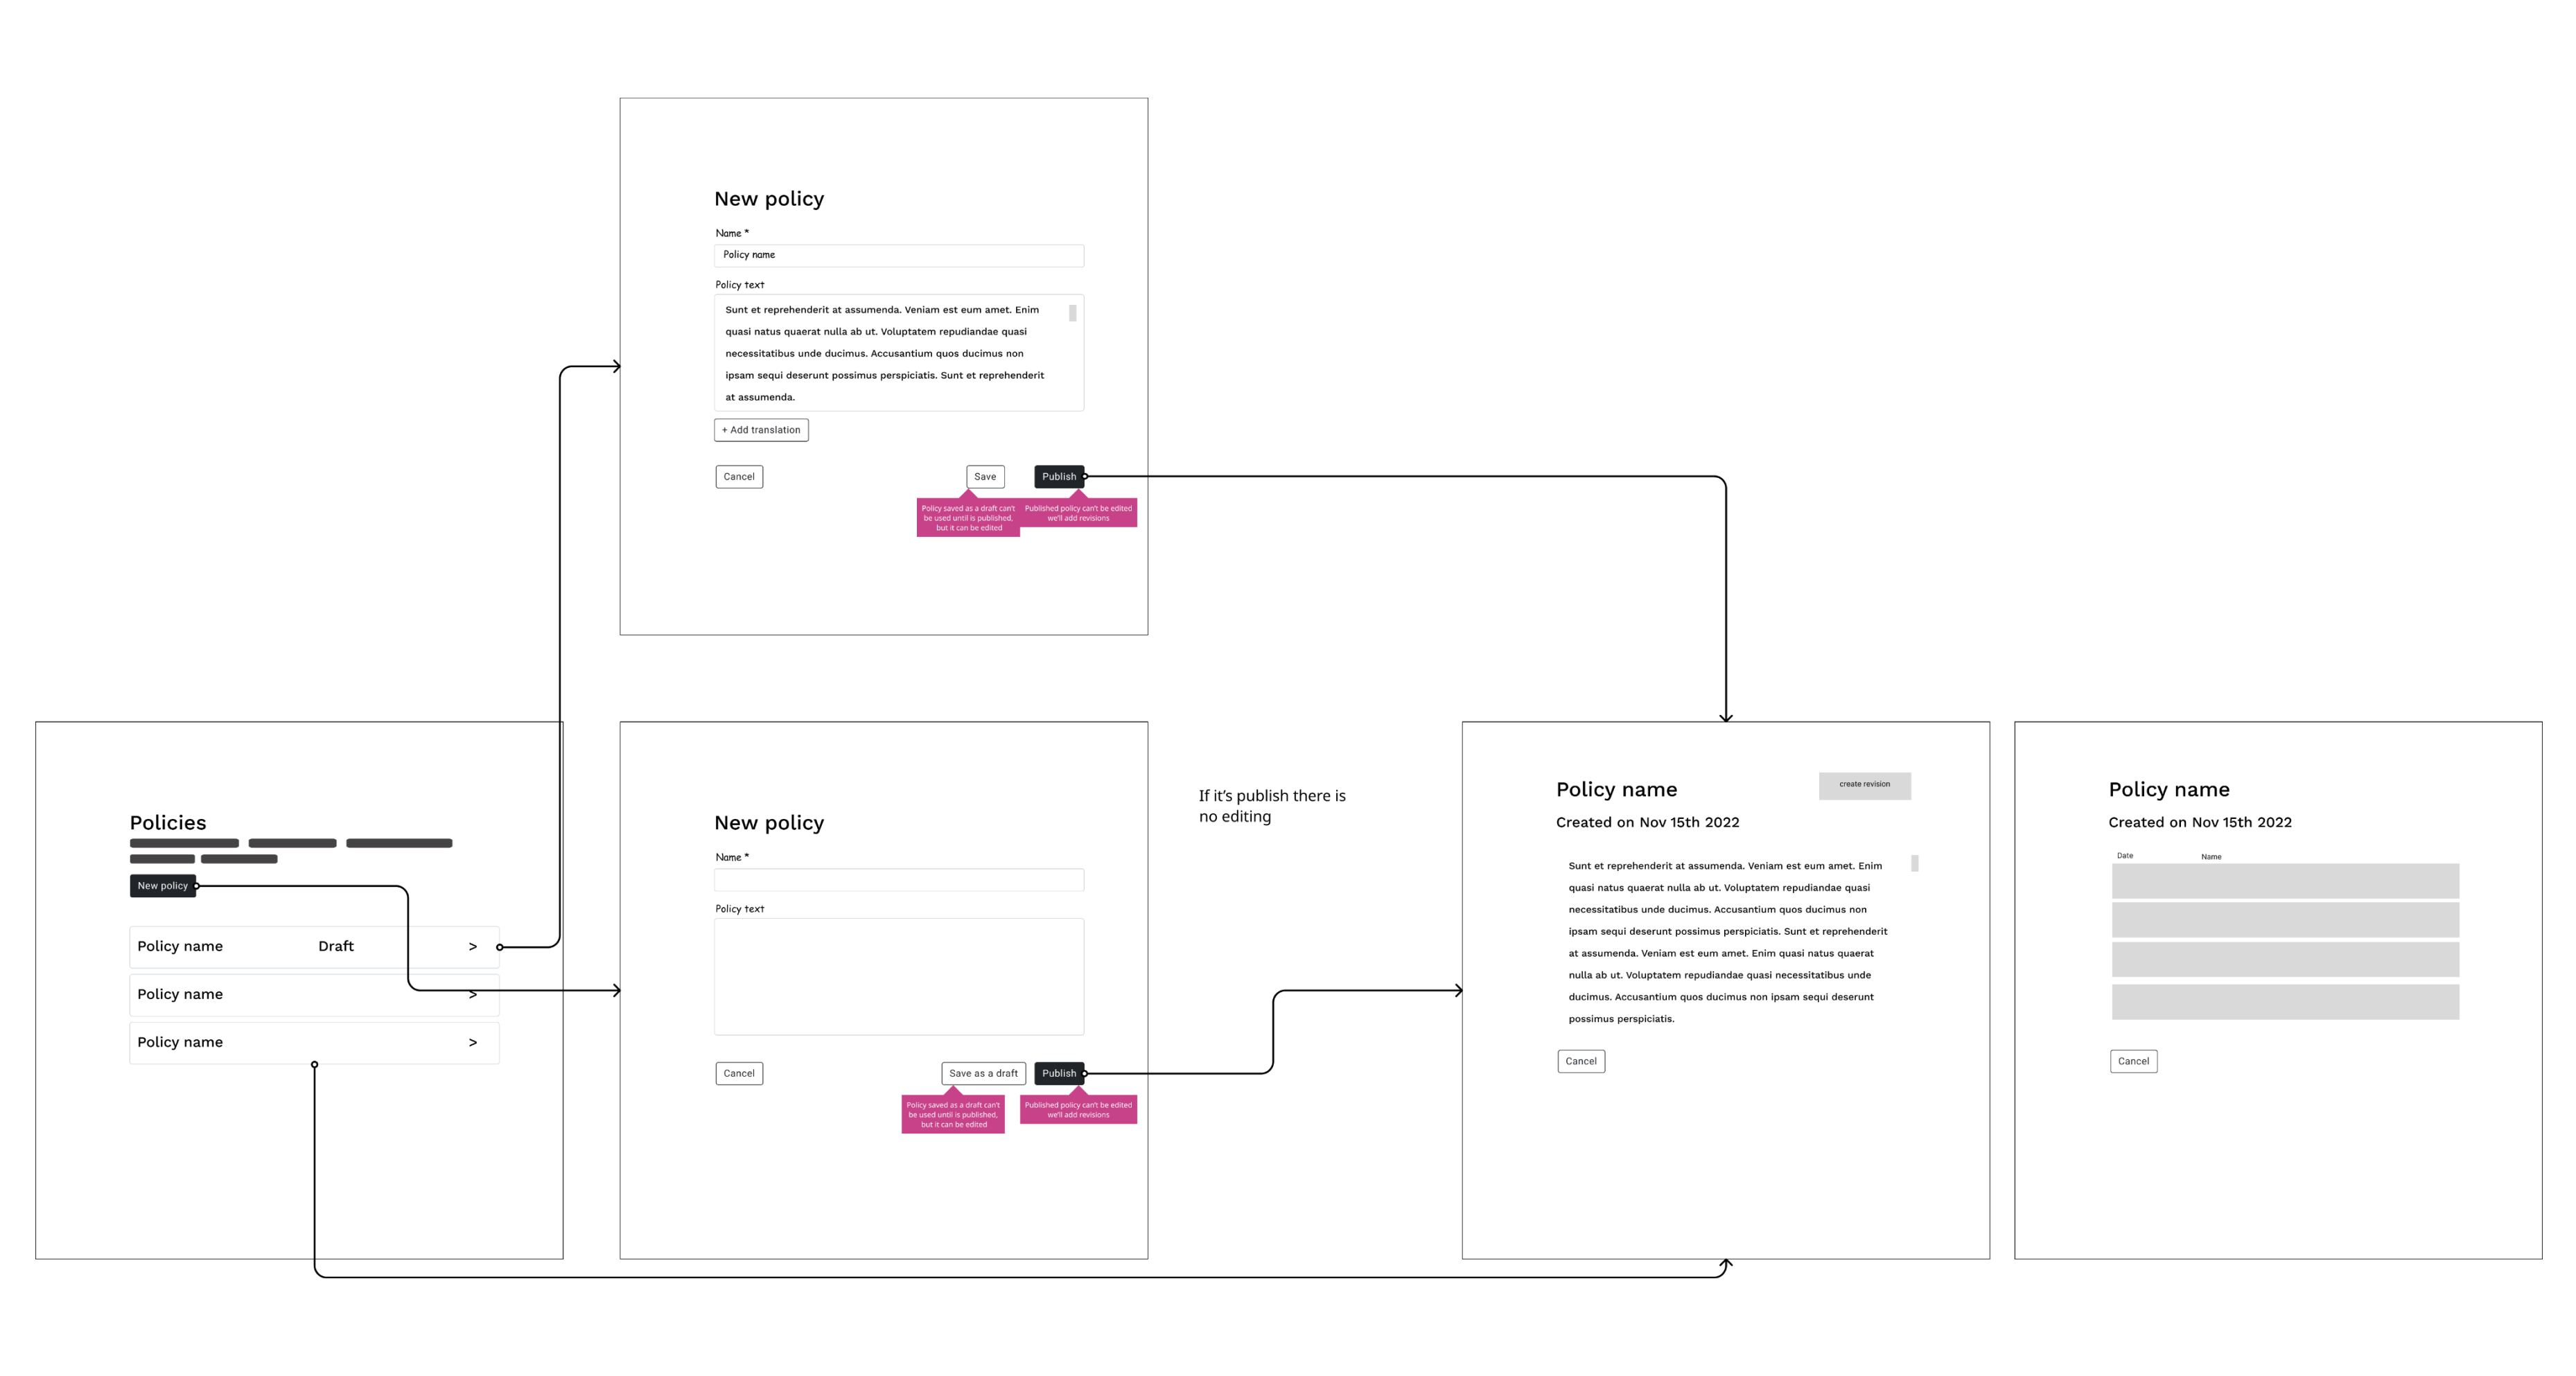 Lo-fi wireframes. They display the flow for creating policy. Where the user is able to create a policy and save it as a draft before publishing. If the policy is published, it can;t be modified